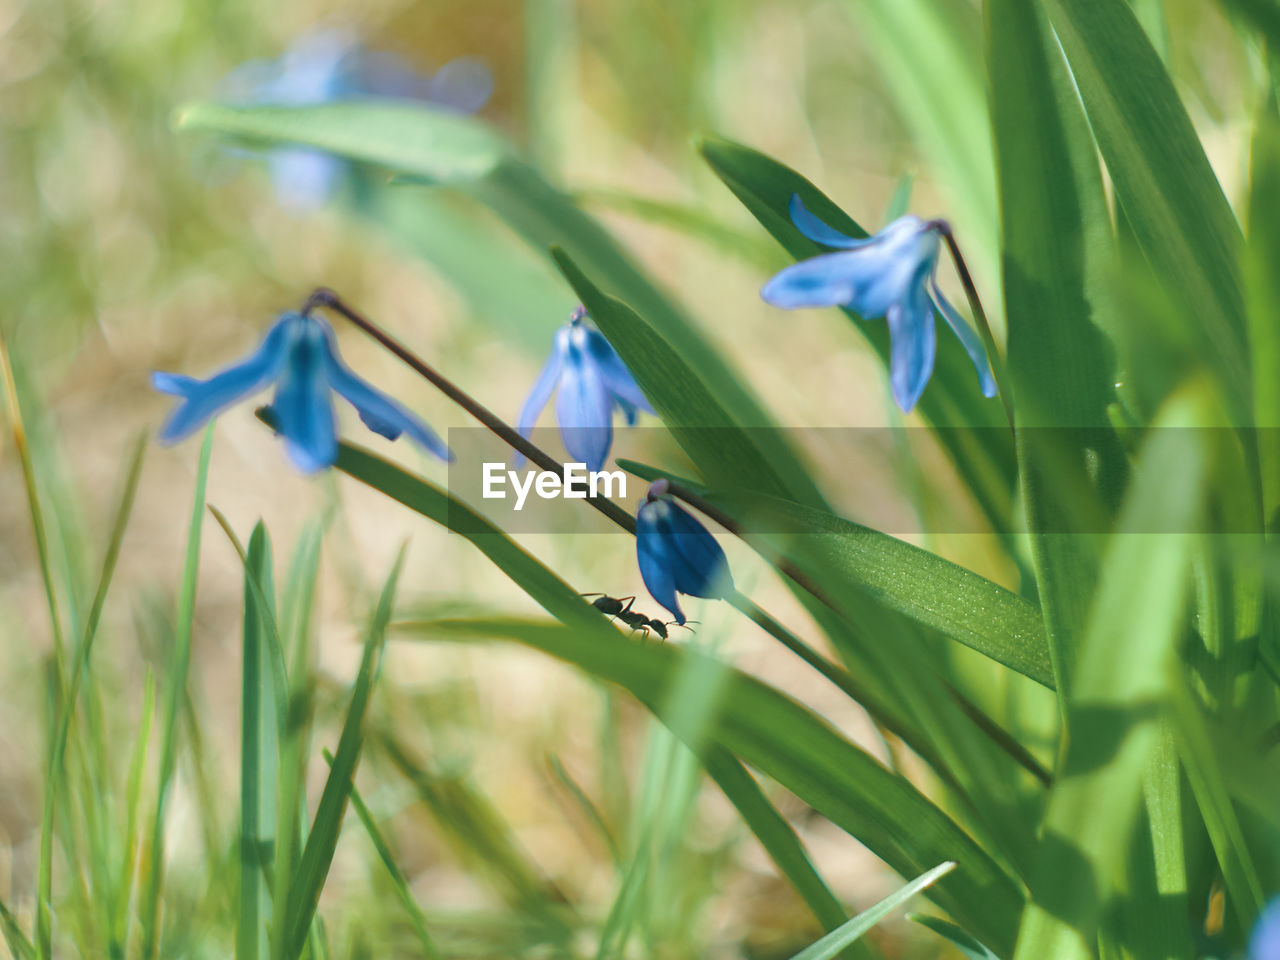 CLOSE-UP OF BLUE FLOWERING PLANT IN FIELD